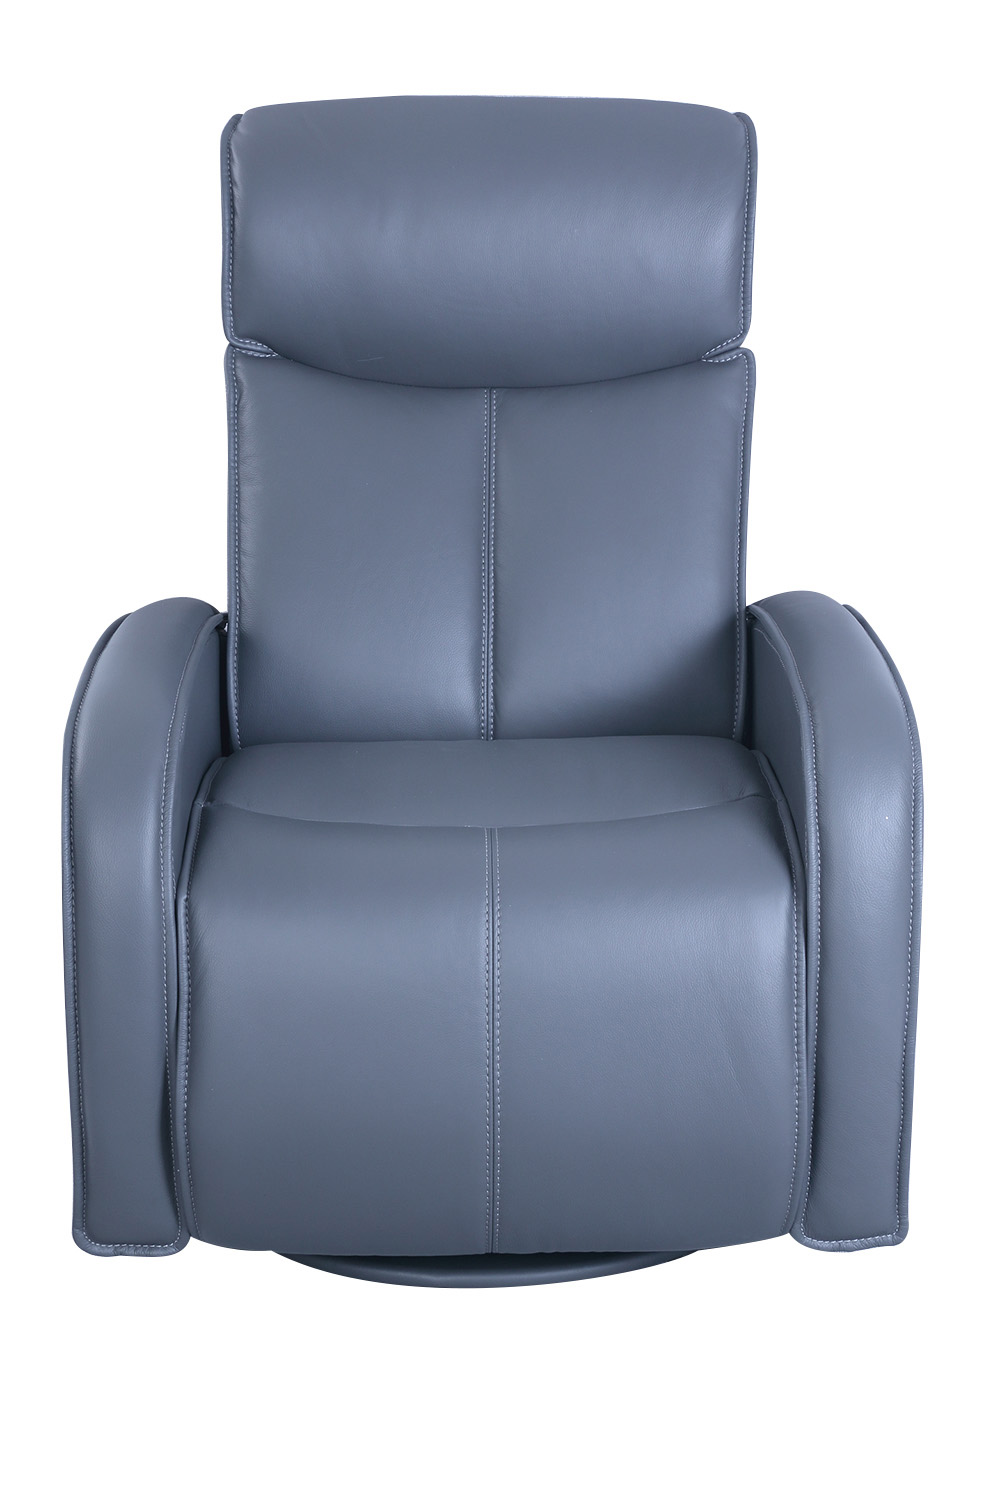 Barcalounger Nico Swivel Glider Power Recliner Chair with Power Head Rest - Marlene Gray/Leather Match